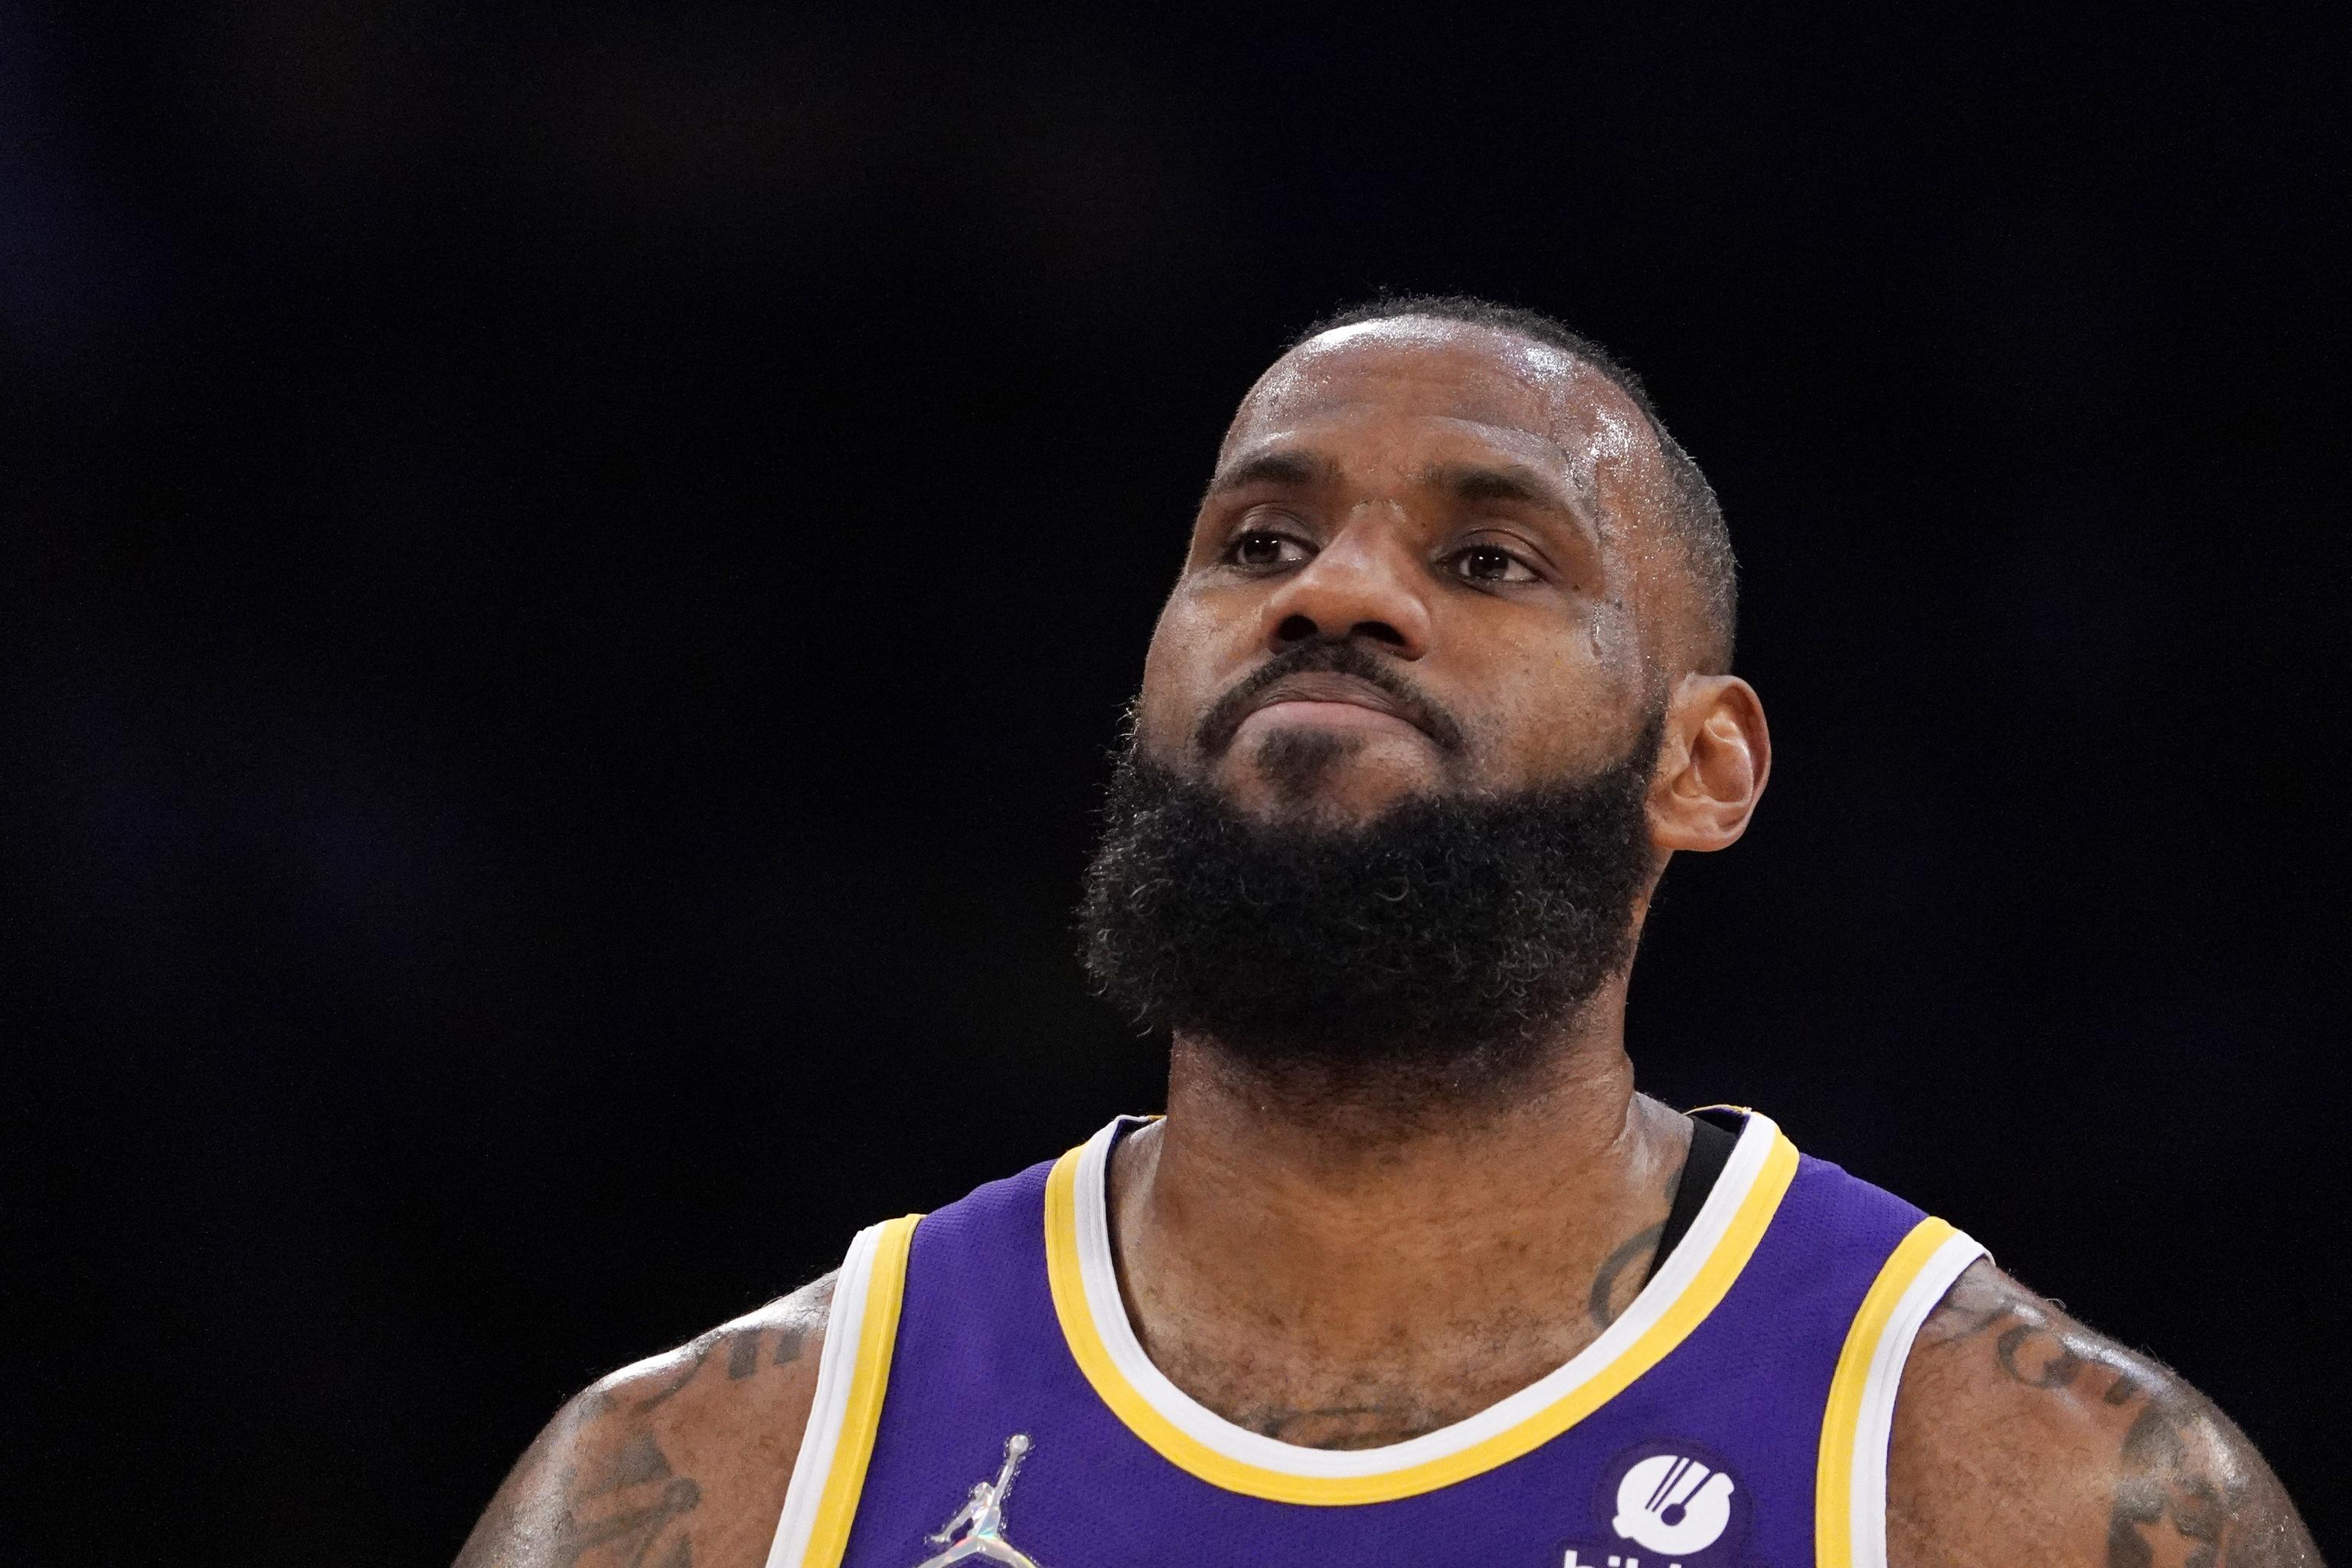 Lakers News: LeBron James Tweets That He's Out For Season On April